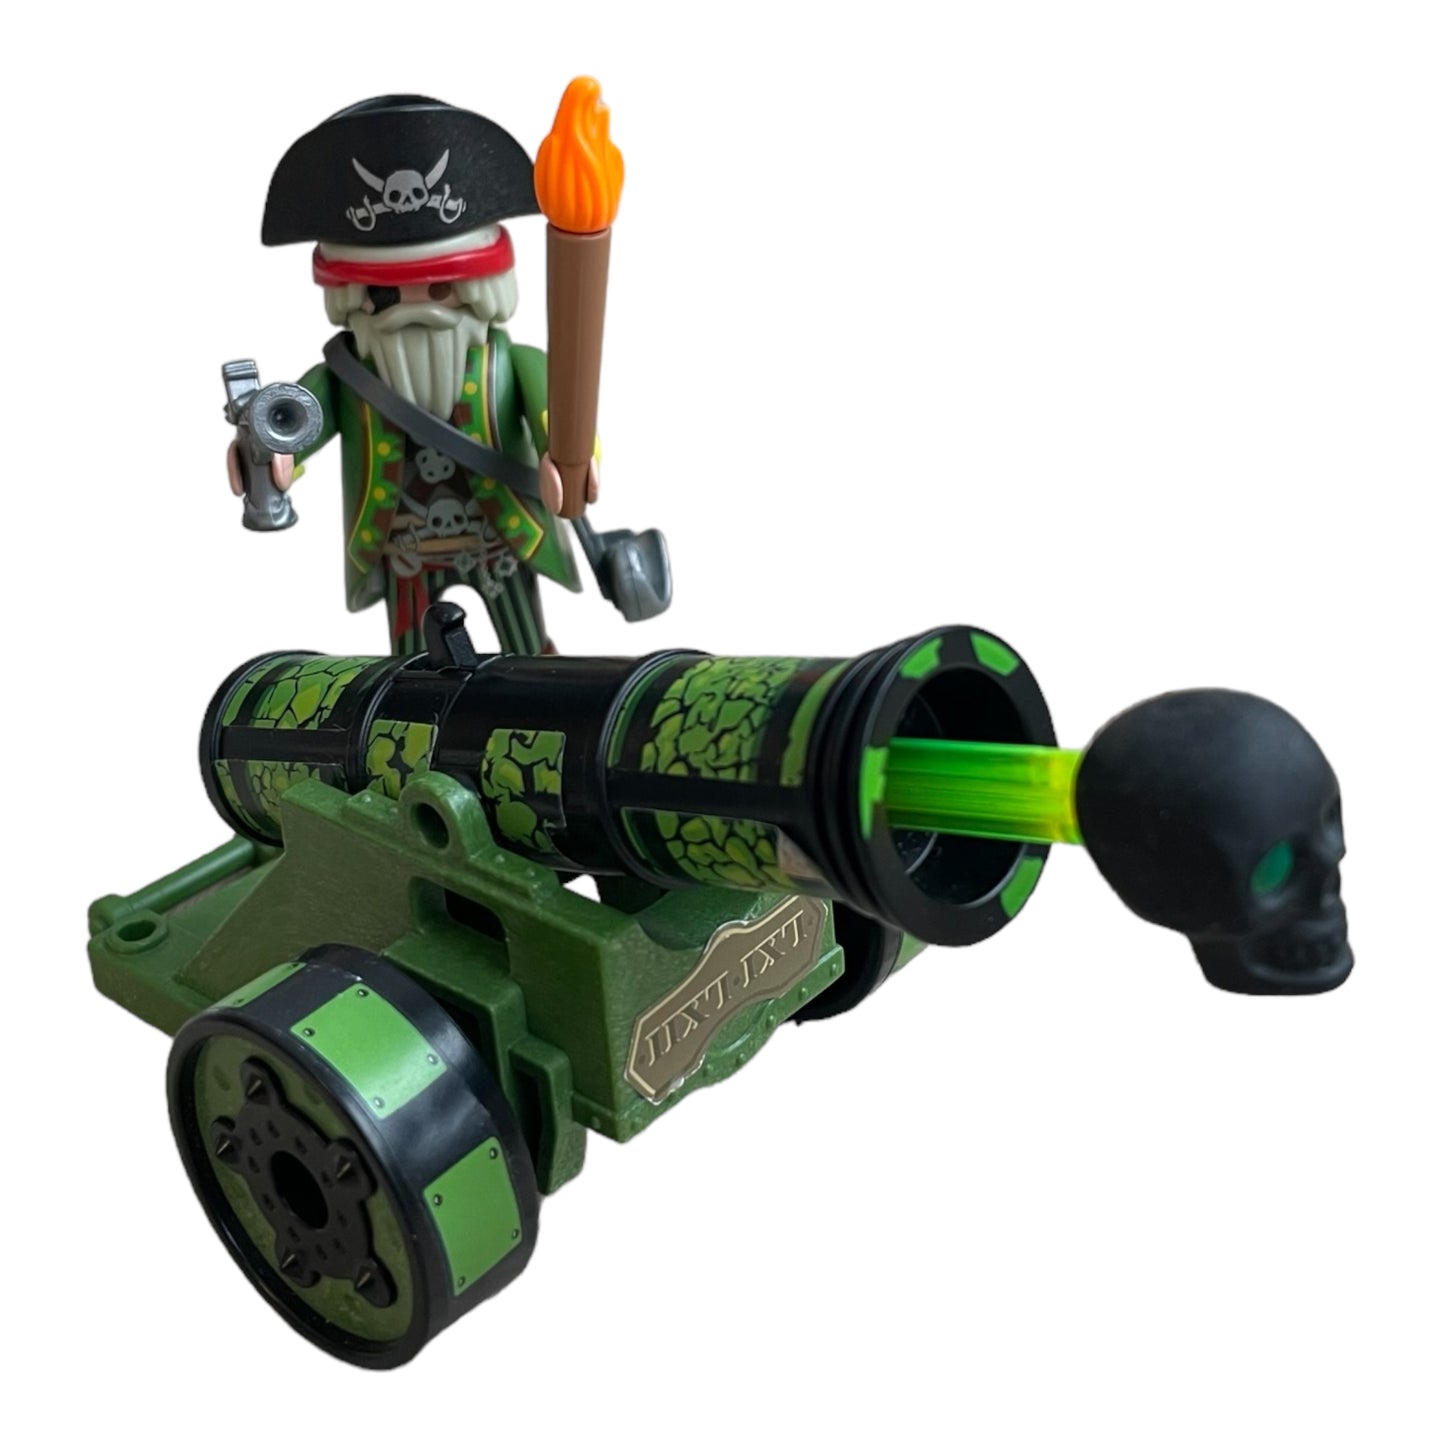 Playmobil ® - Pirate captain with green canon - 6162